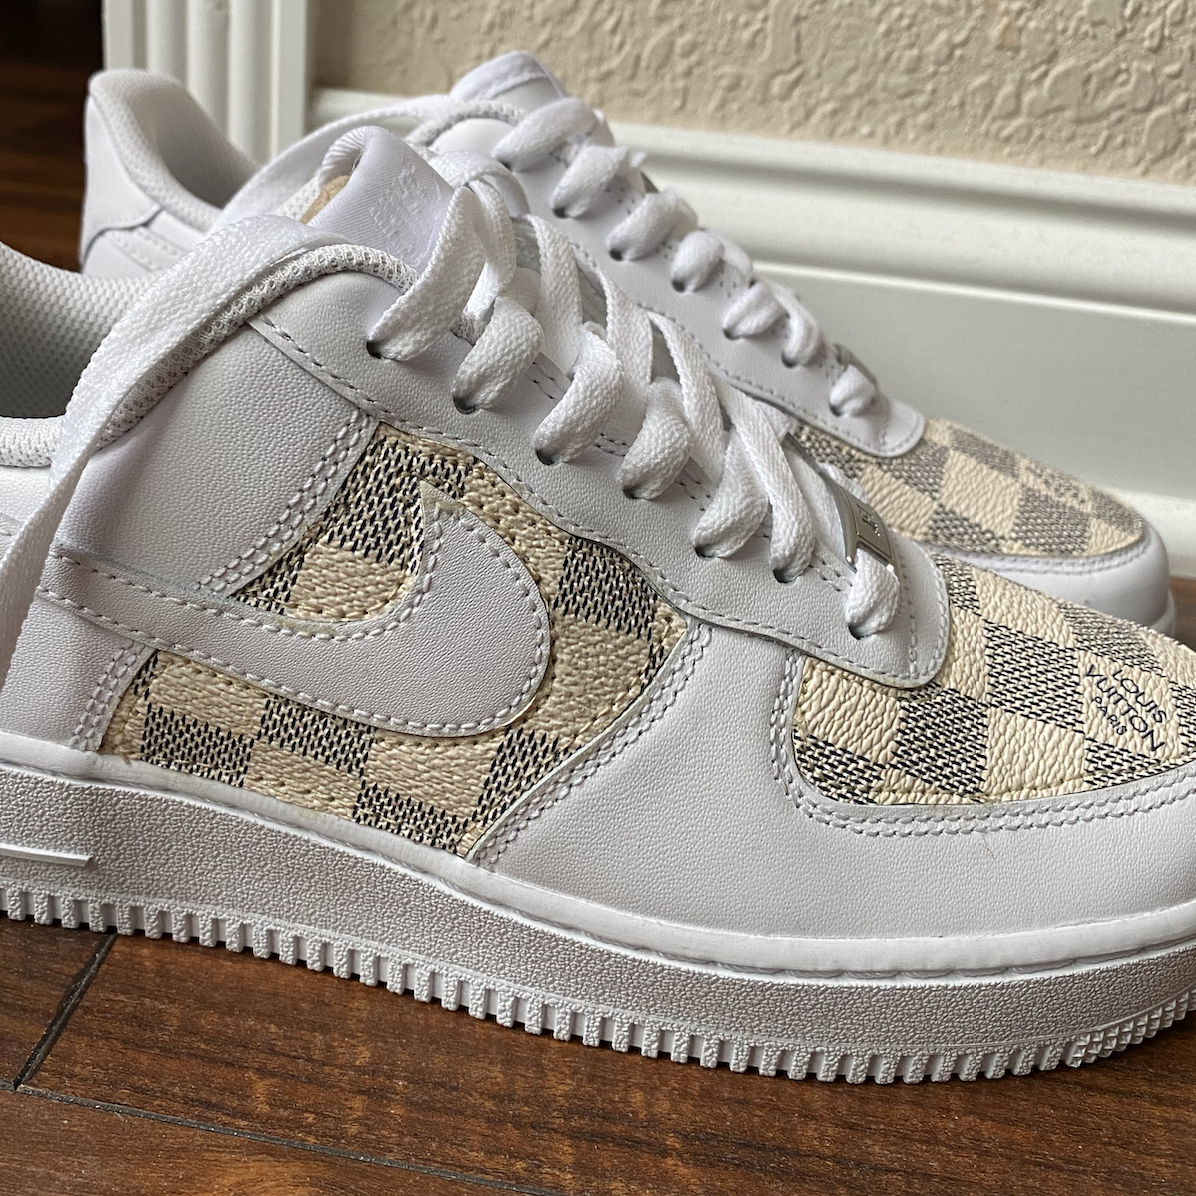 checkered air force ones